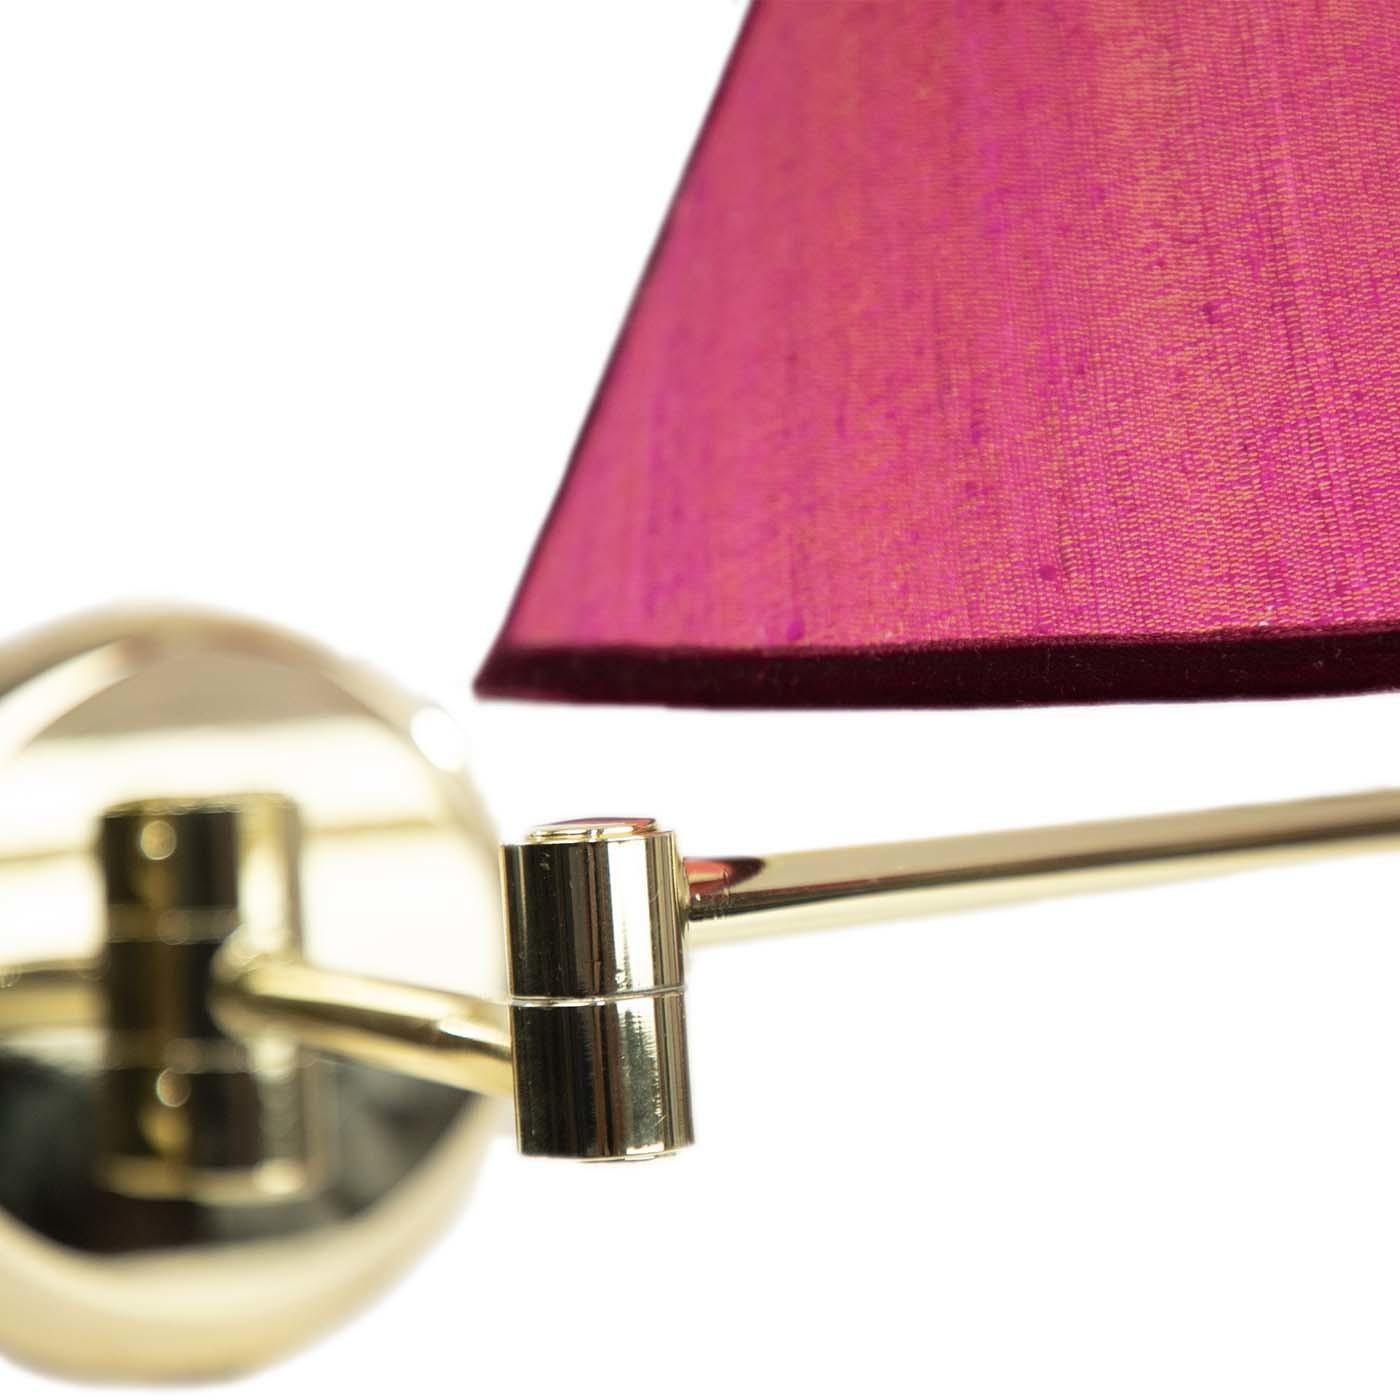 The Pepita wall light boasts a gold metal base, equipped with a practical swivel arm and chain switch mechanism. Its timeless conical shade is upholstered in vibrant pink raw silk, featuring burgundy velvet trims for a refined finish. A seamless